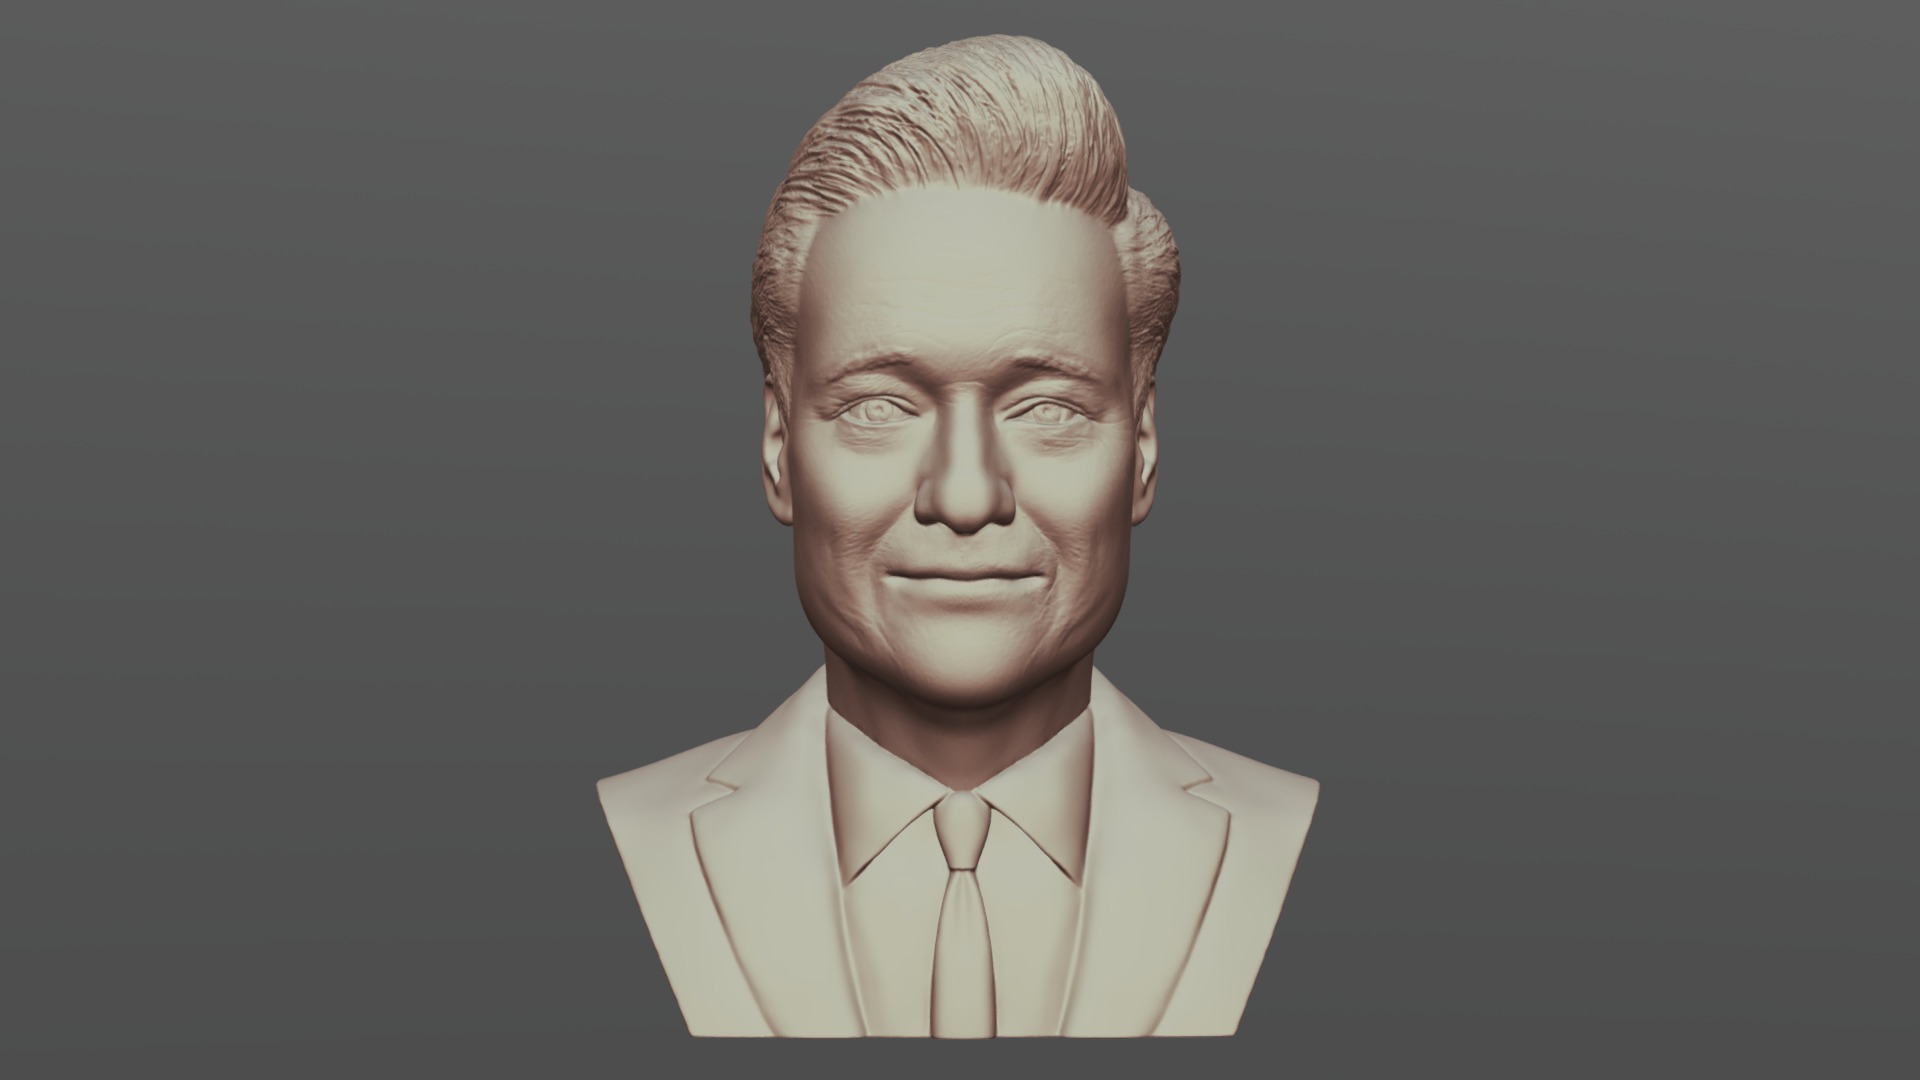 3D model Conan O’Brien bust for 3D printing - This is a 3D model of the Conan O'Brien bust for 3D printing. The 3D model is about a man with a straight face.